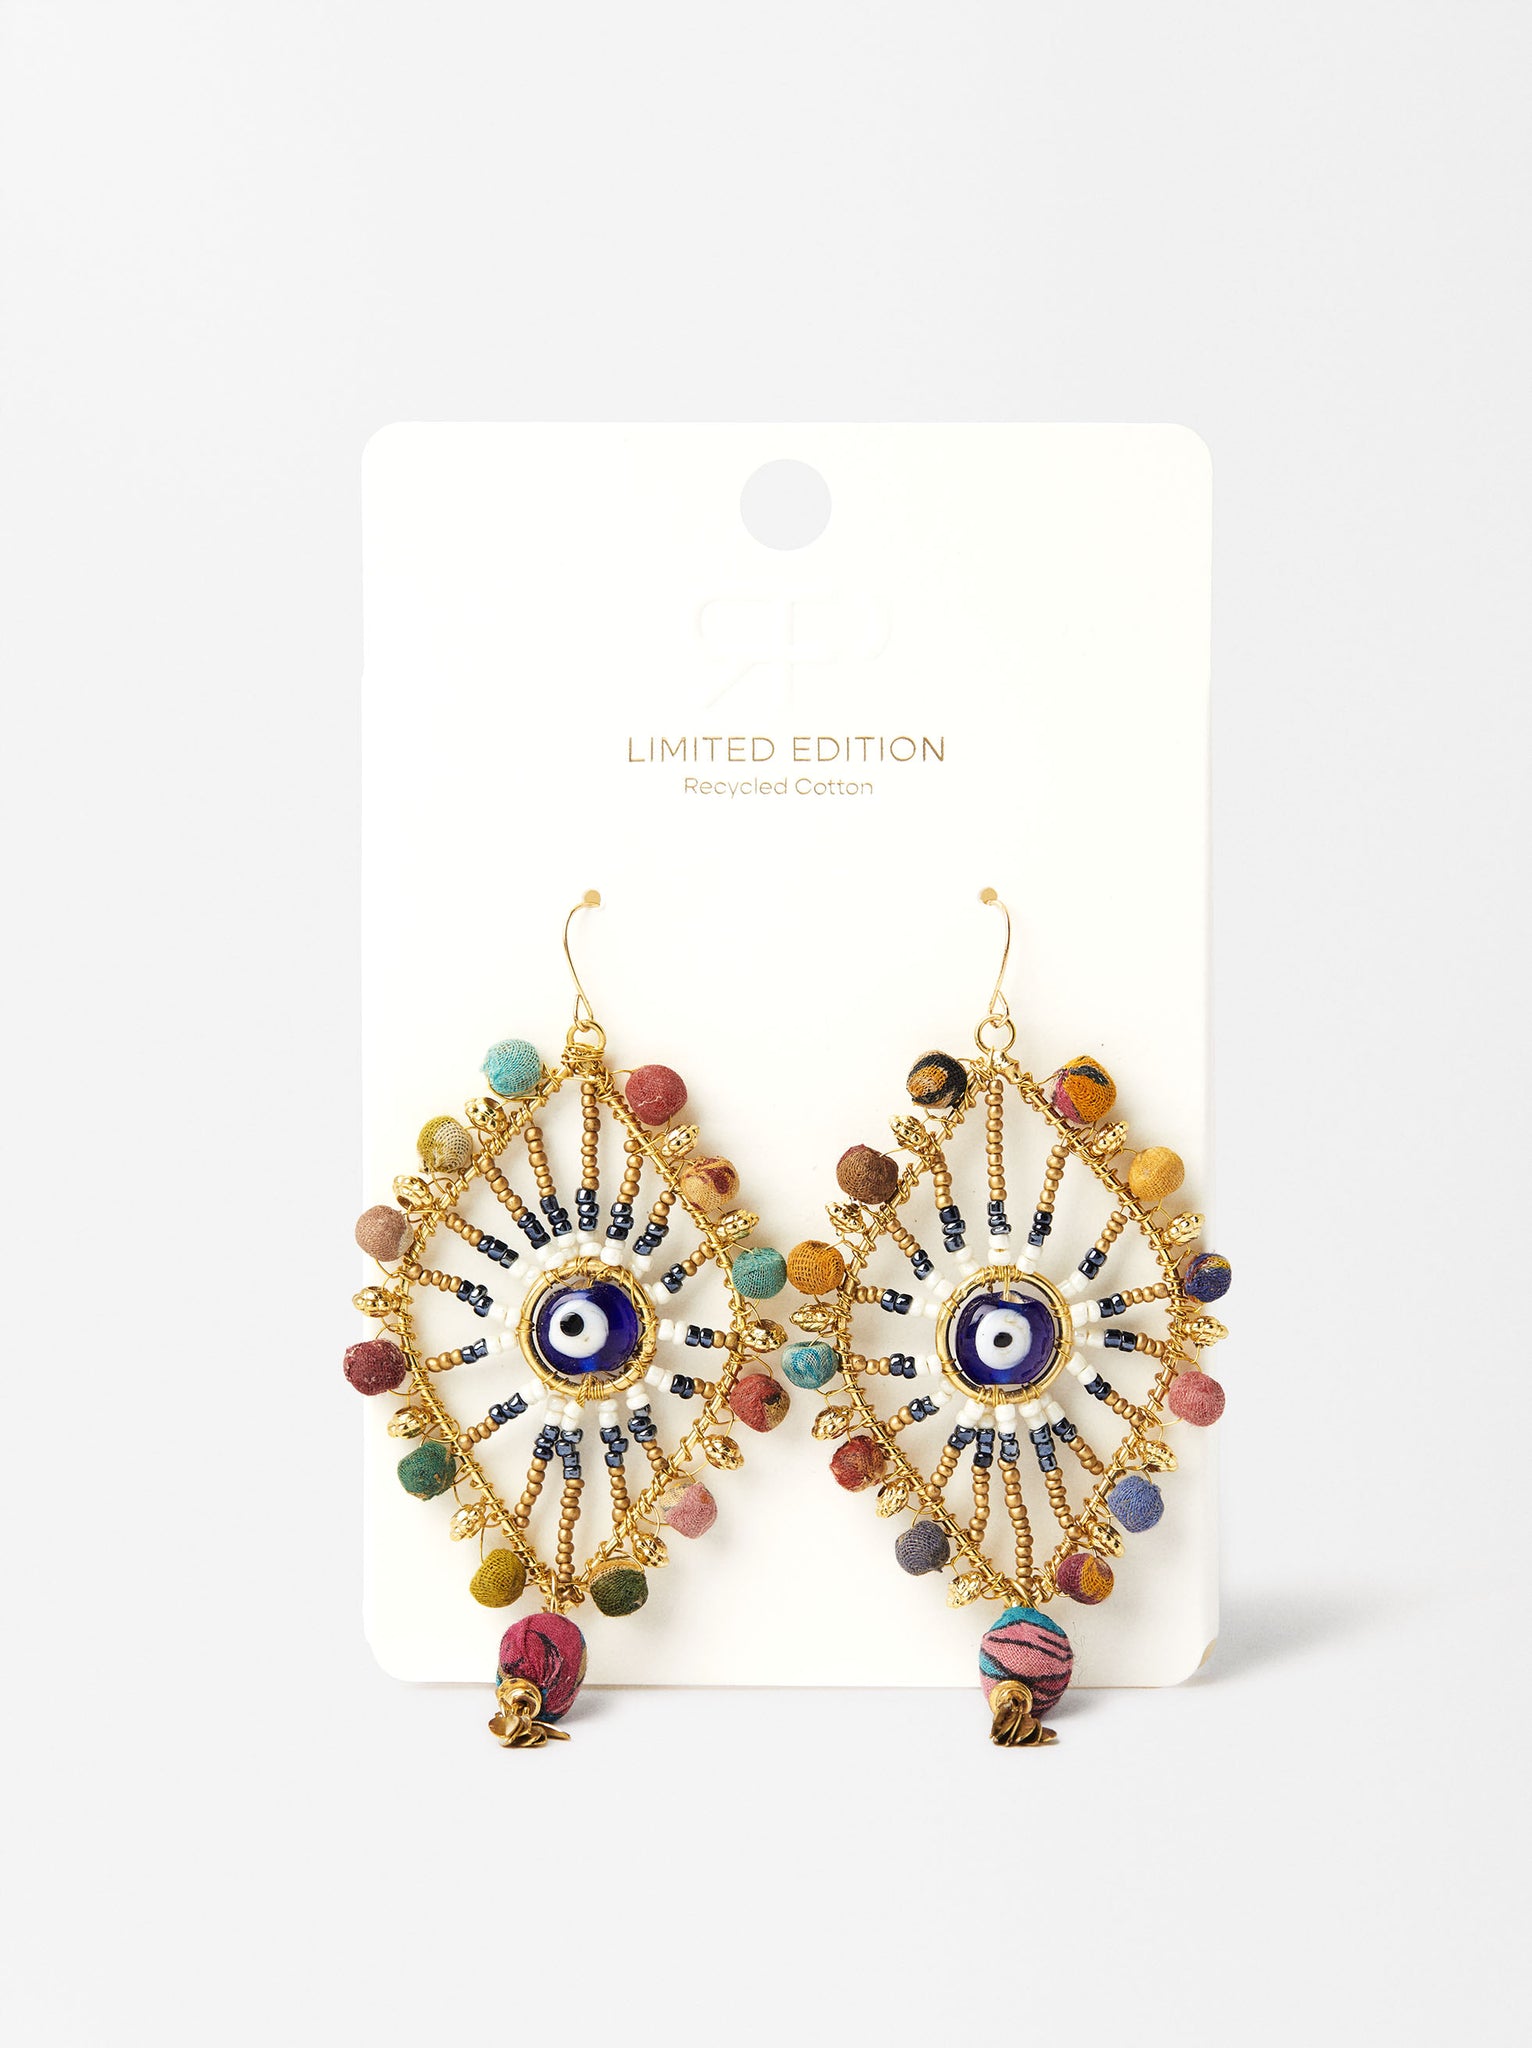 Recycled Cotton Eye Earrings - Limited Edition